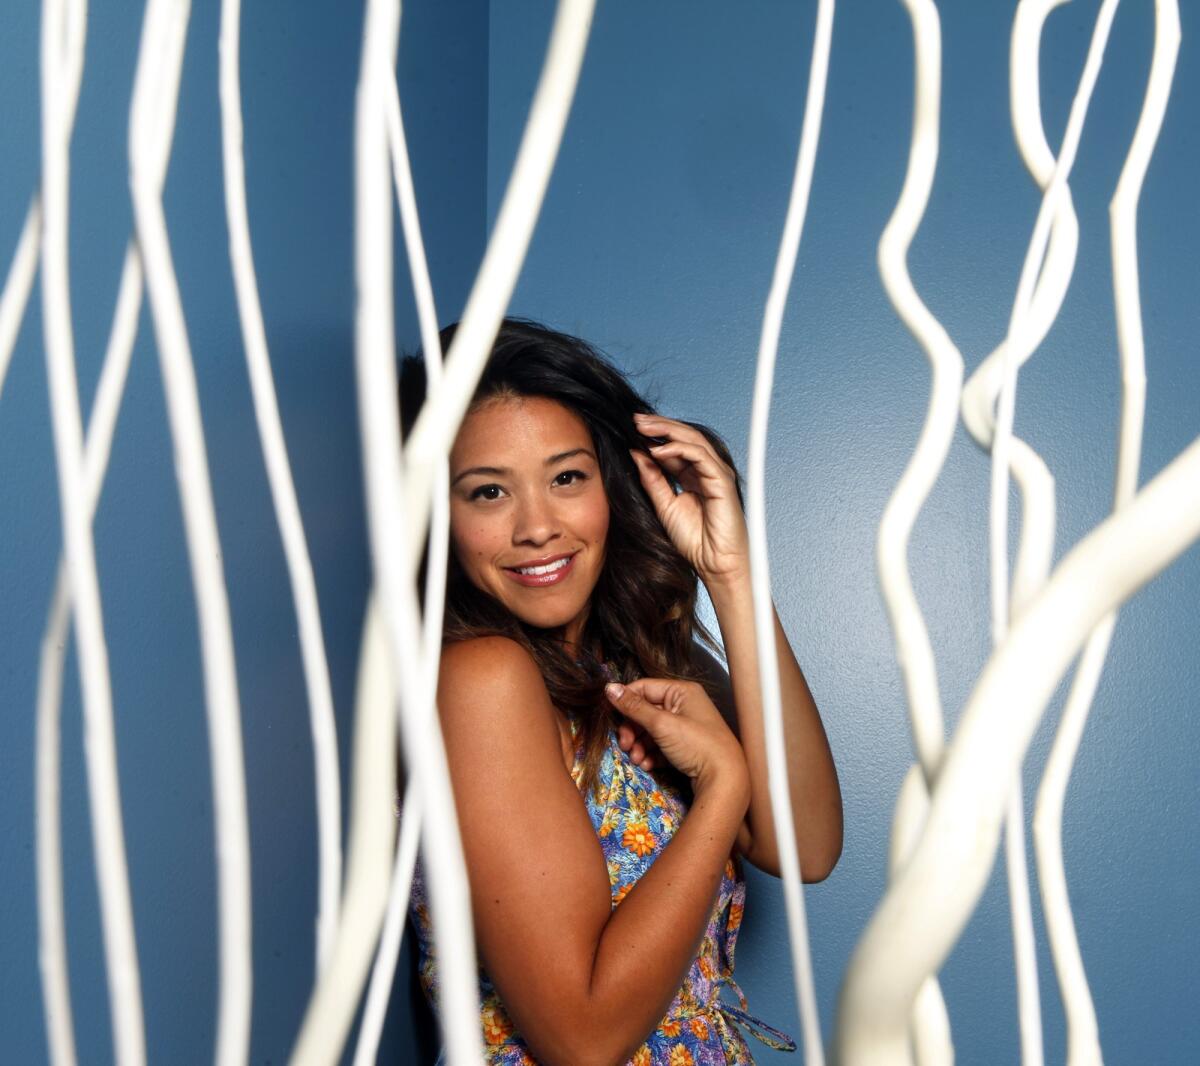 Gina Rodriguez is the star of the new CW show "Jane the Virgin," based on a Venezuelan telenovela.